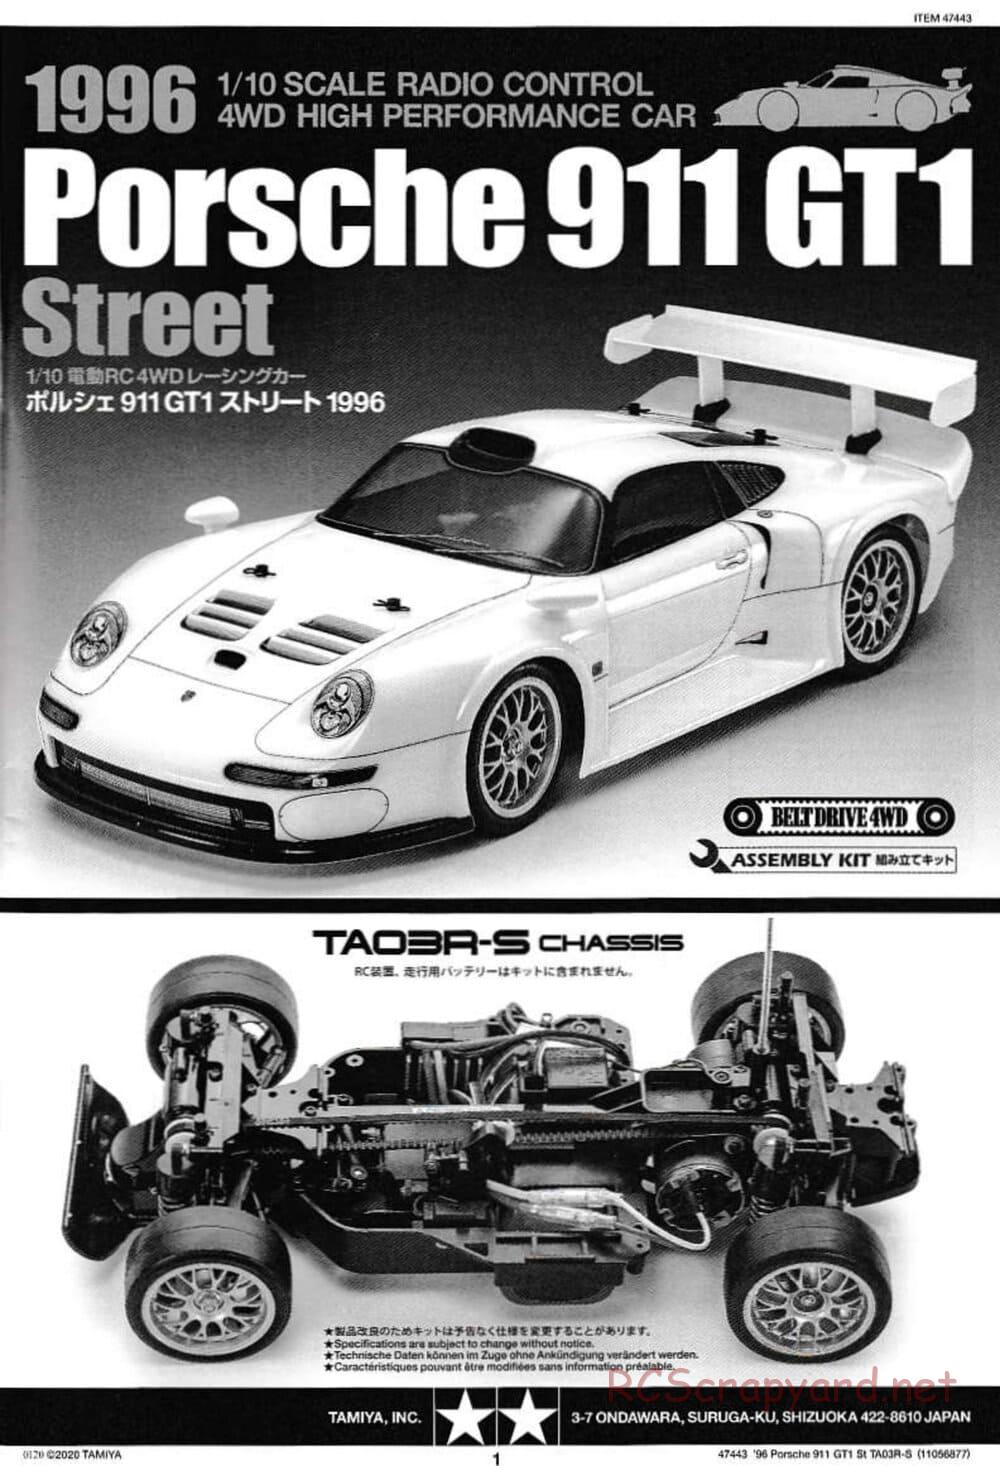 Tamiya - Porsche 911 GT1 Street - TA-03RS Chassis - Manual - Page 1